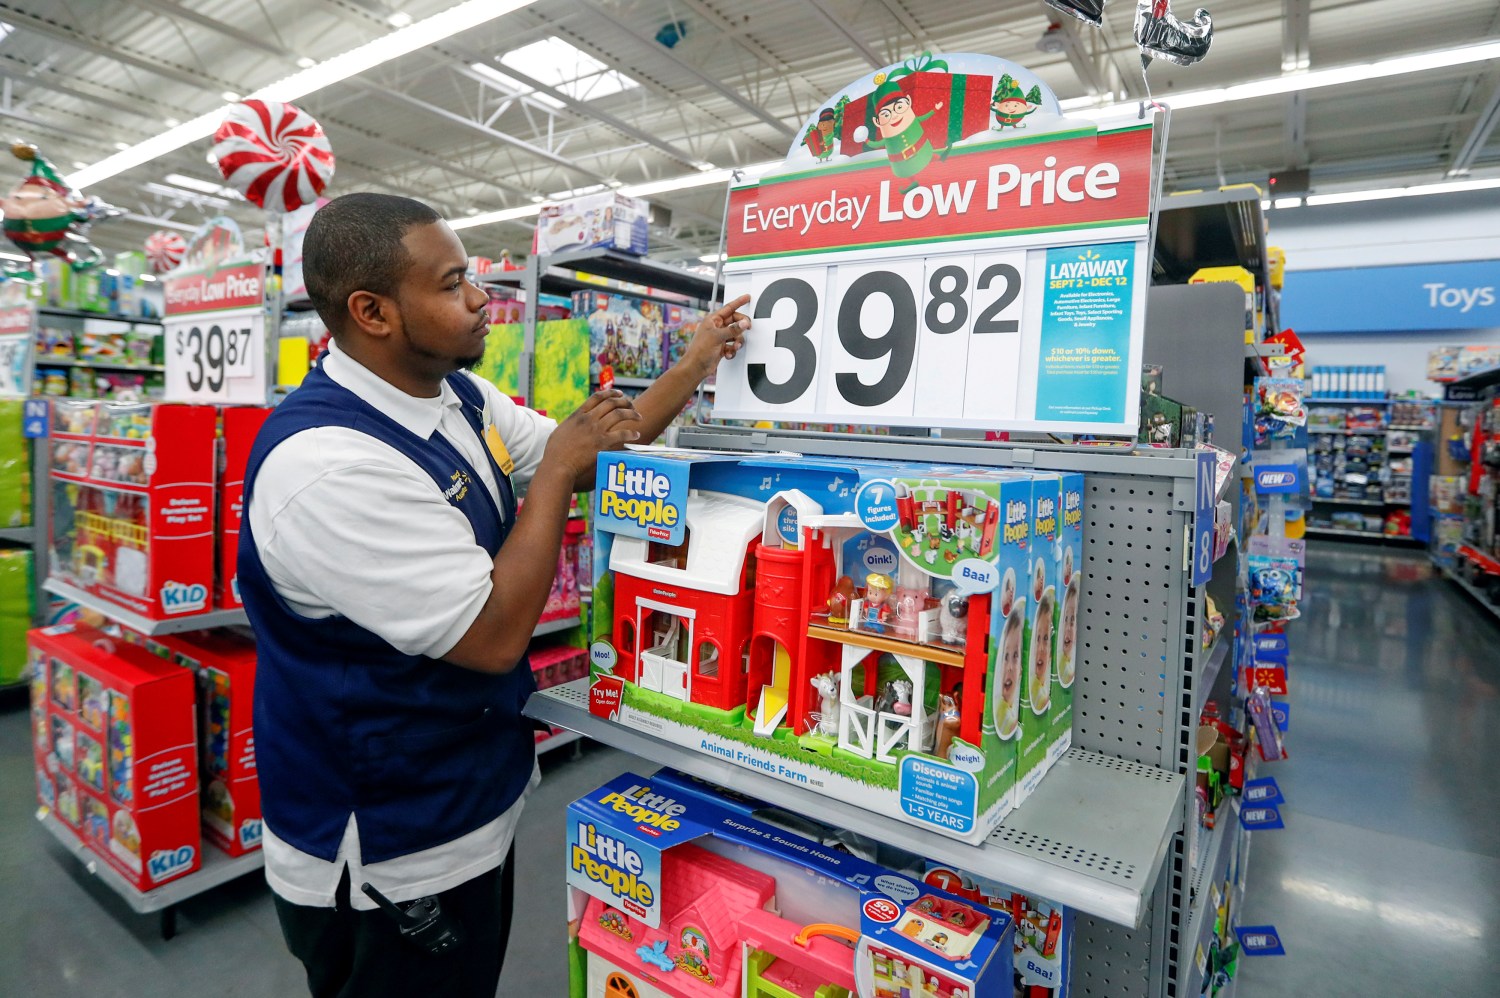 FILE PHOTO: An employee puts up a price tag ahead of Black Friday at a Walmart store in Chicago, Illinois, U.S. November 23, 2016. REUTERS/Kamil Krzaczynski/File Photo